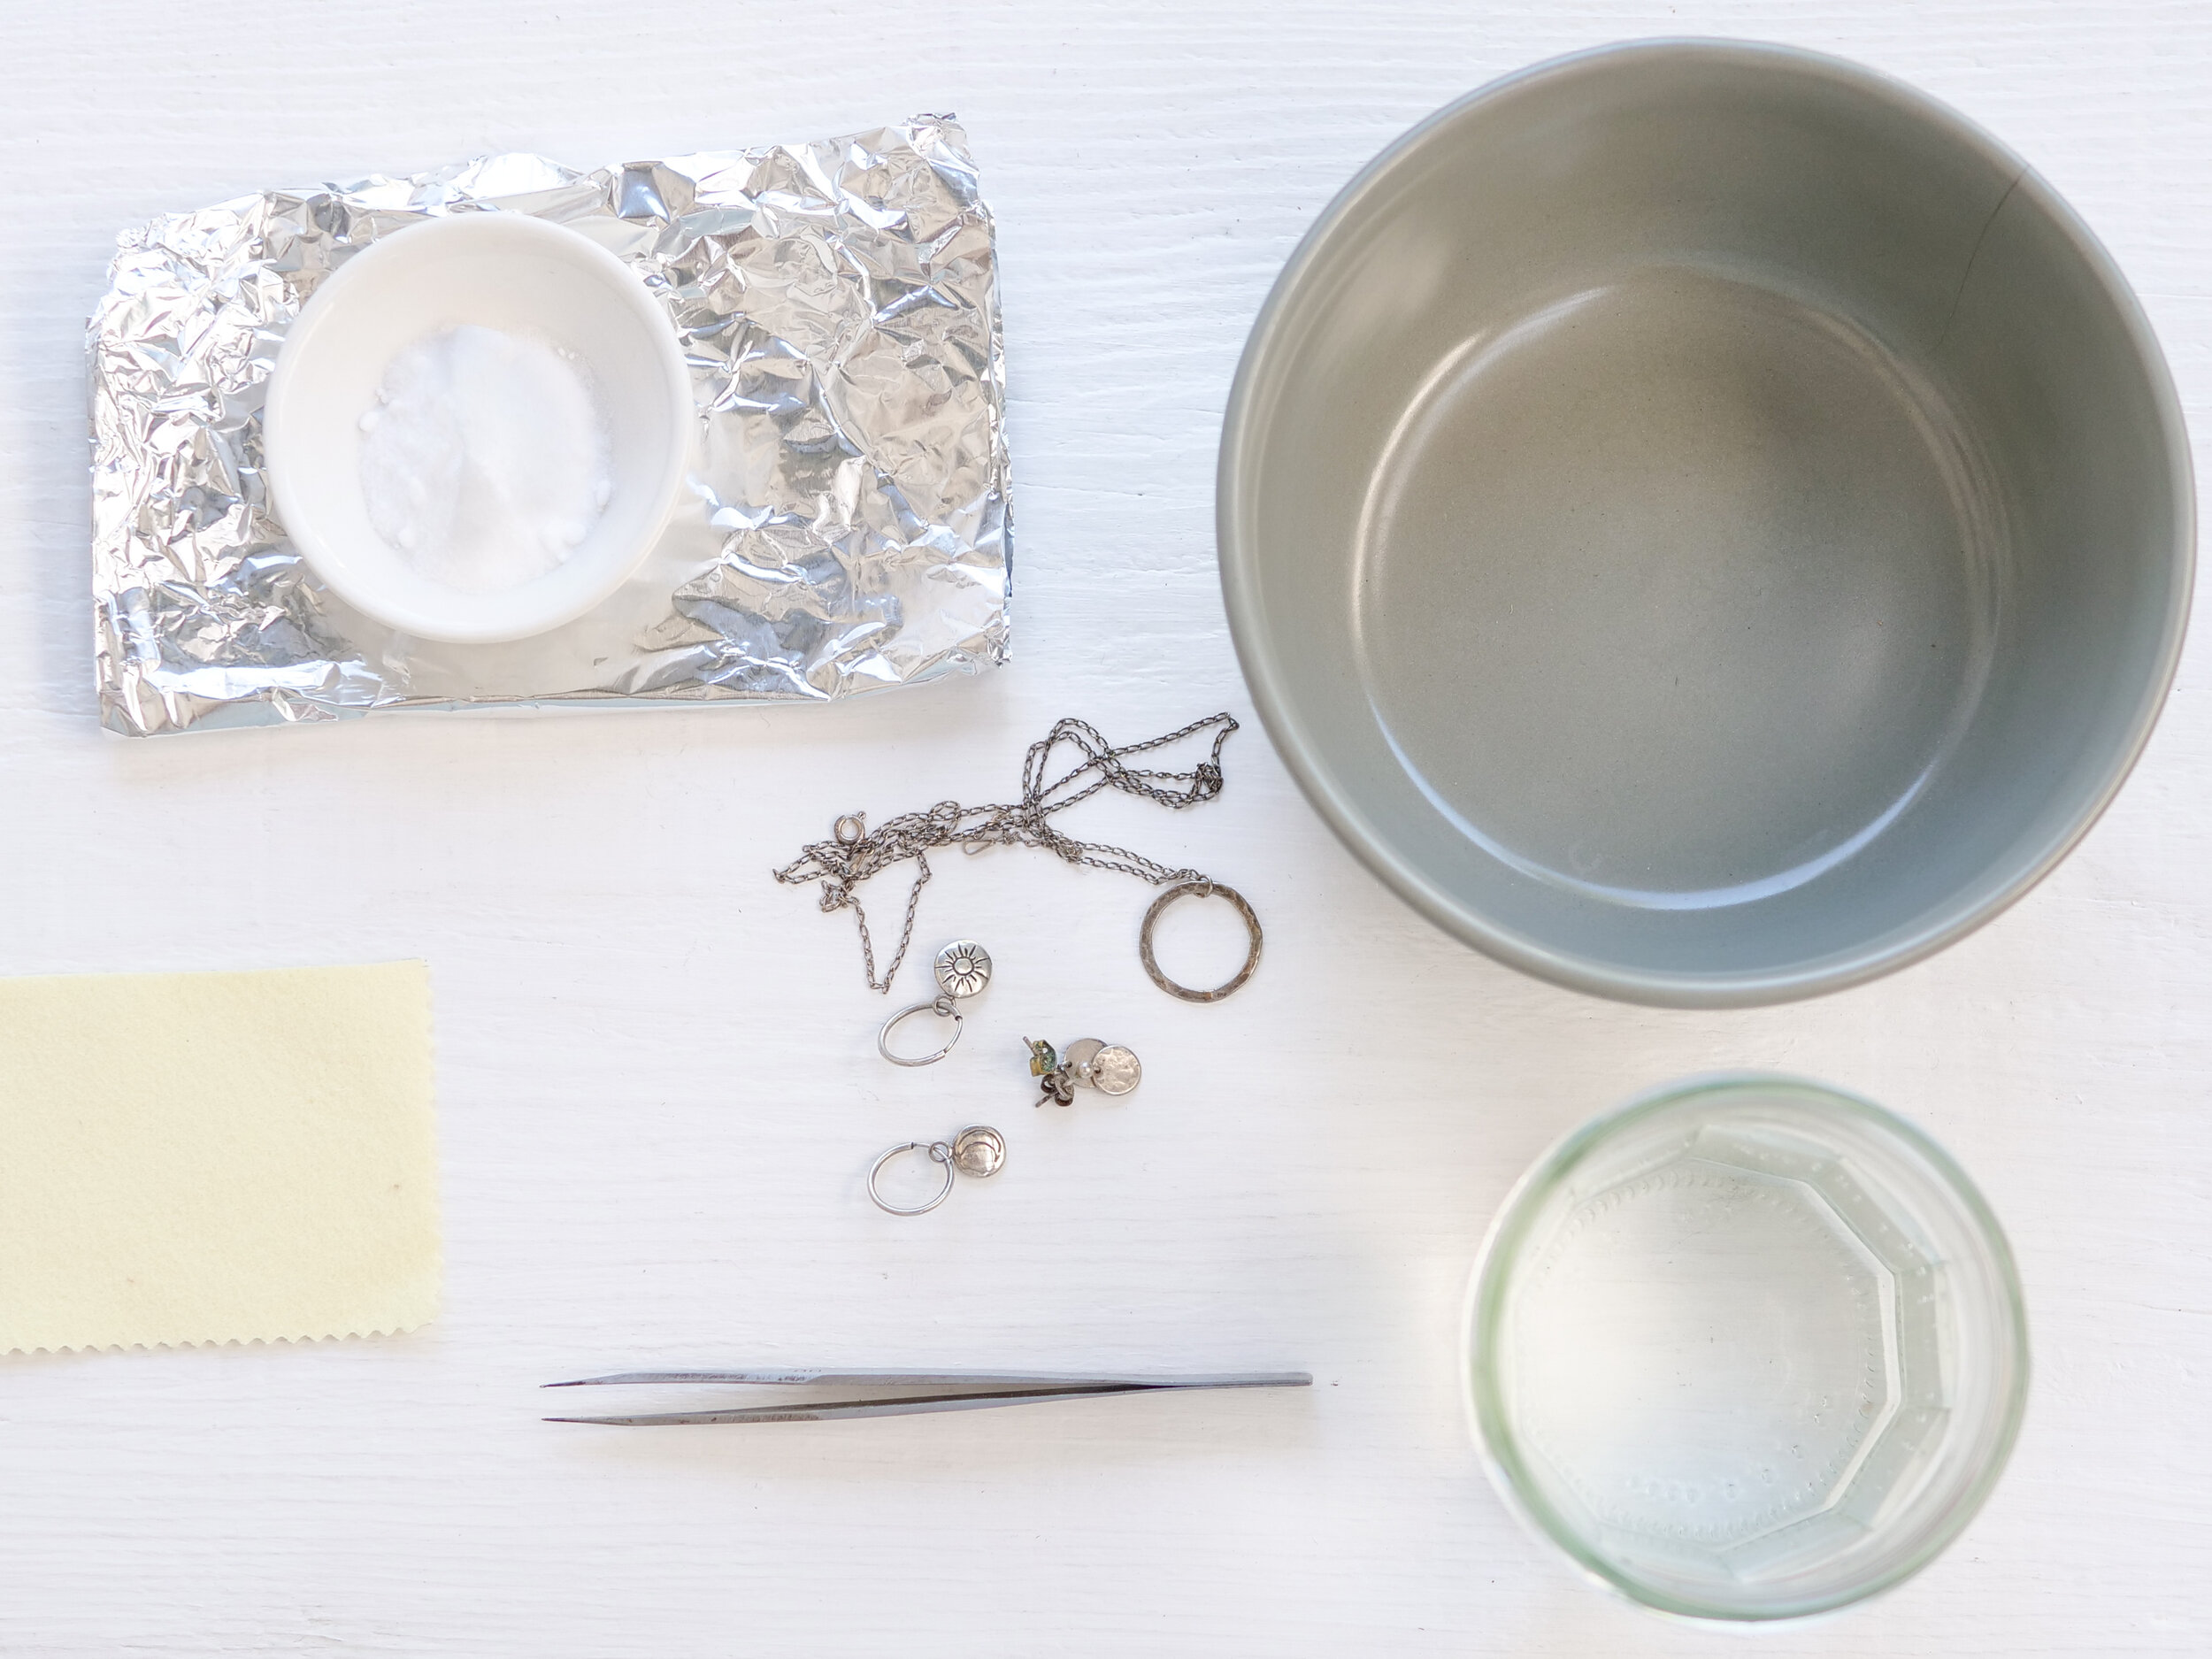 jewellery care guide: how to clean your jewellery - #jewelleryblog